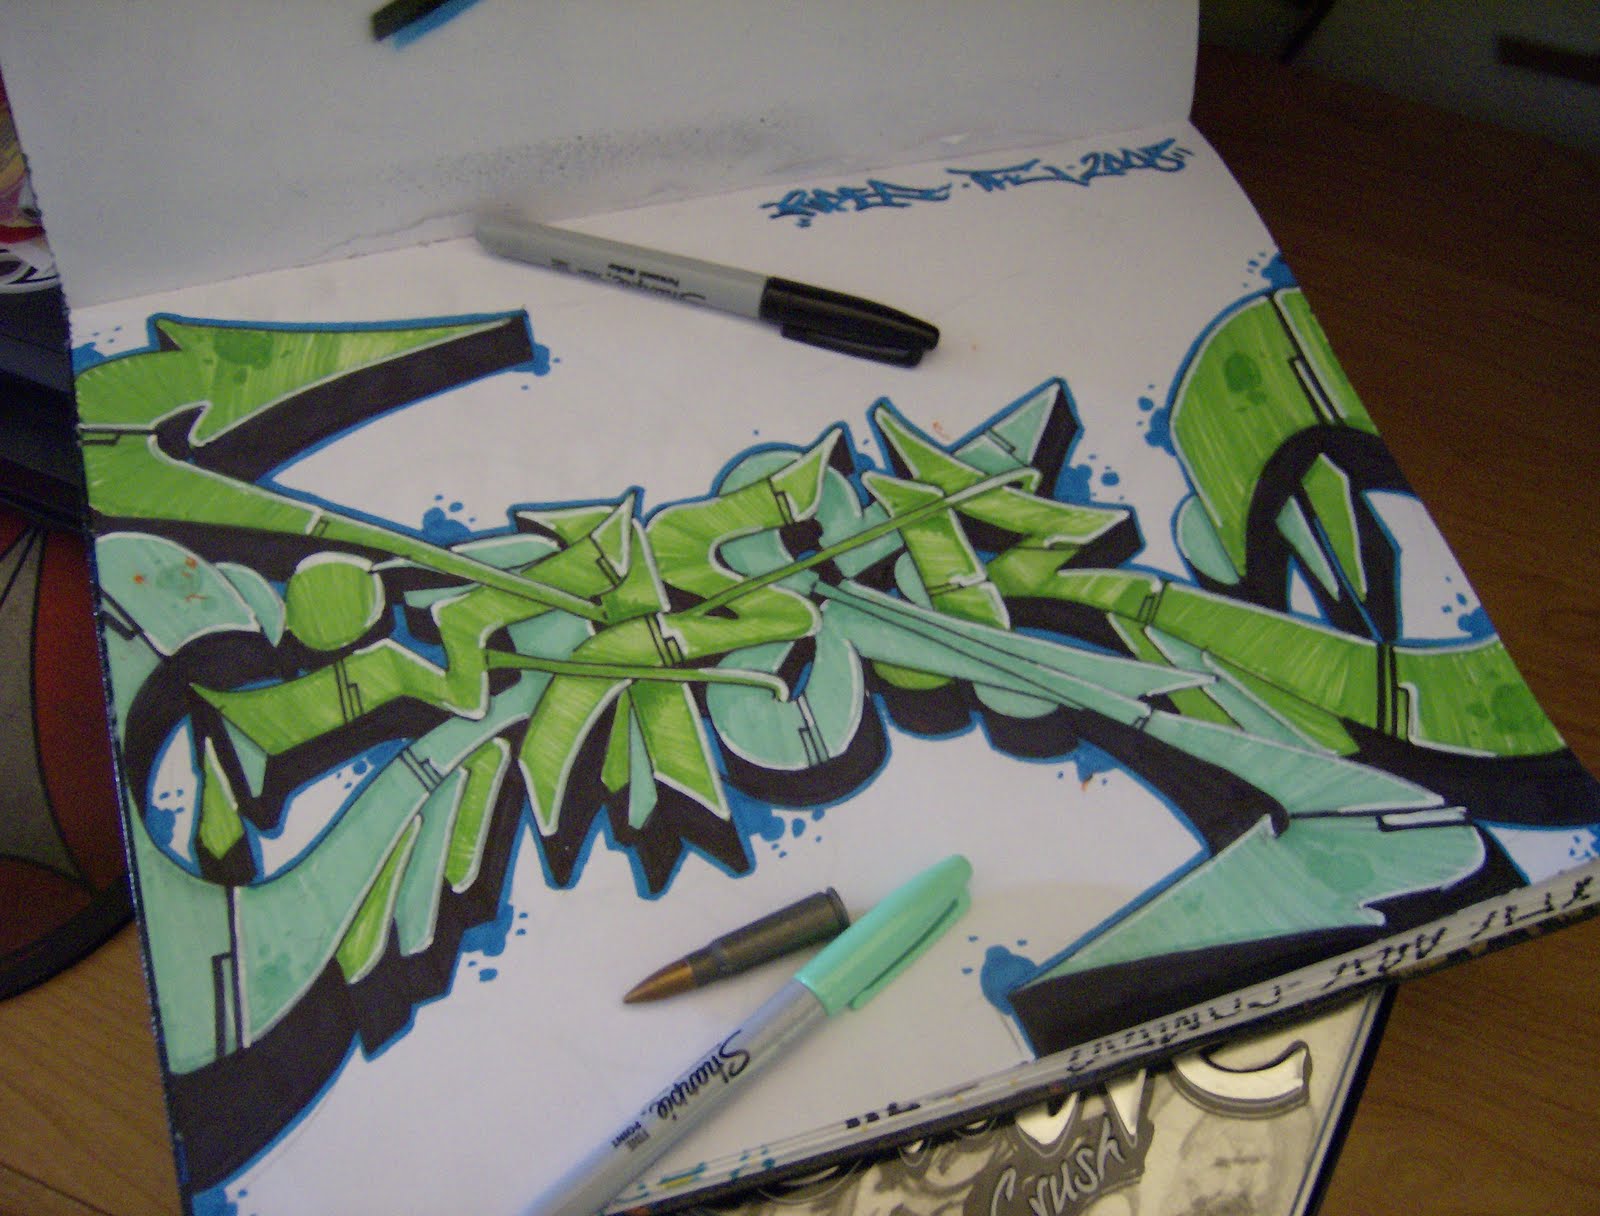 Wildstyle Graffiti Sketch At Explore Collection Of